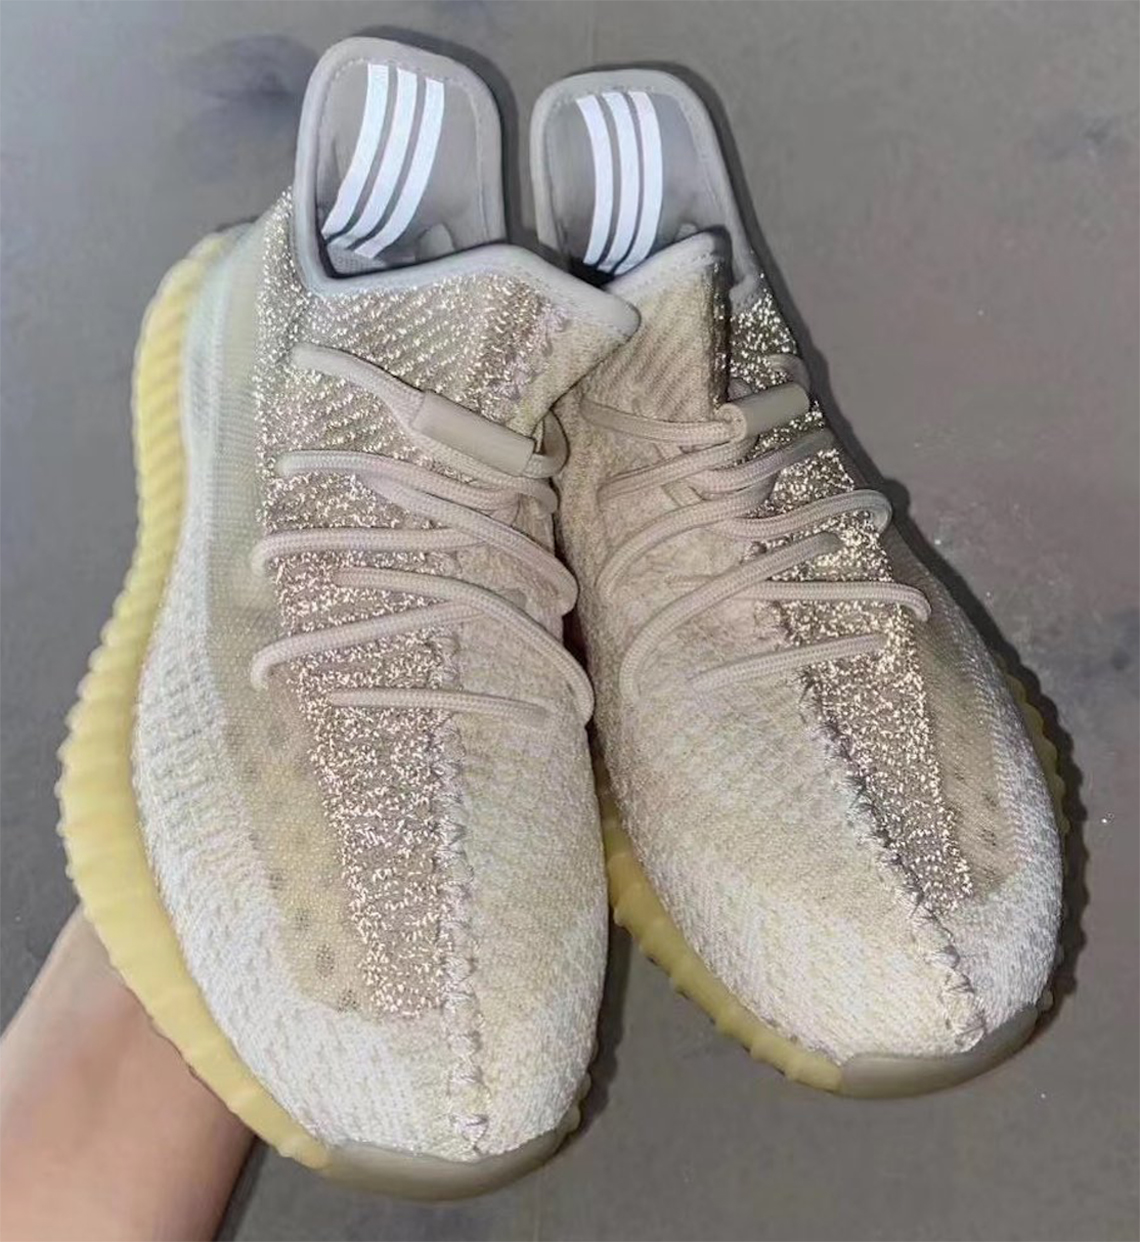 sample the wind is strong appeal adidas Yeezy Boost 350 v2 Natural Release Info | SneakerNews.com